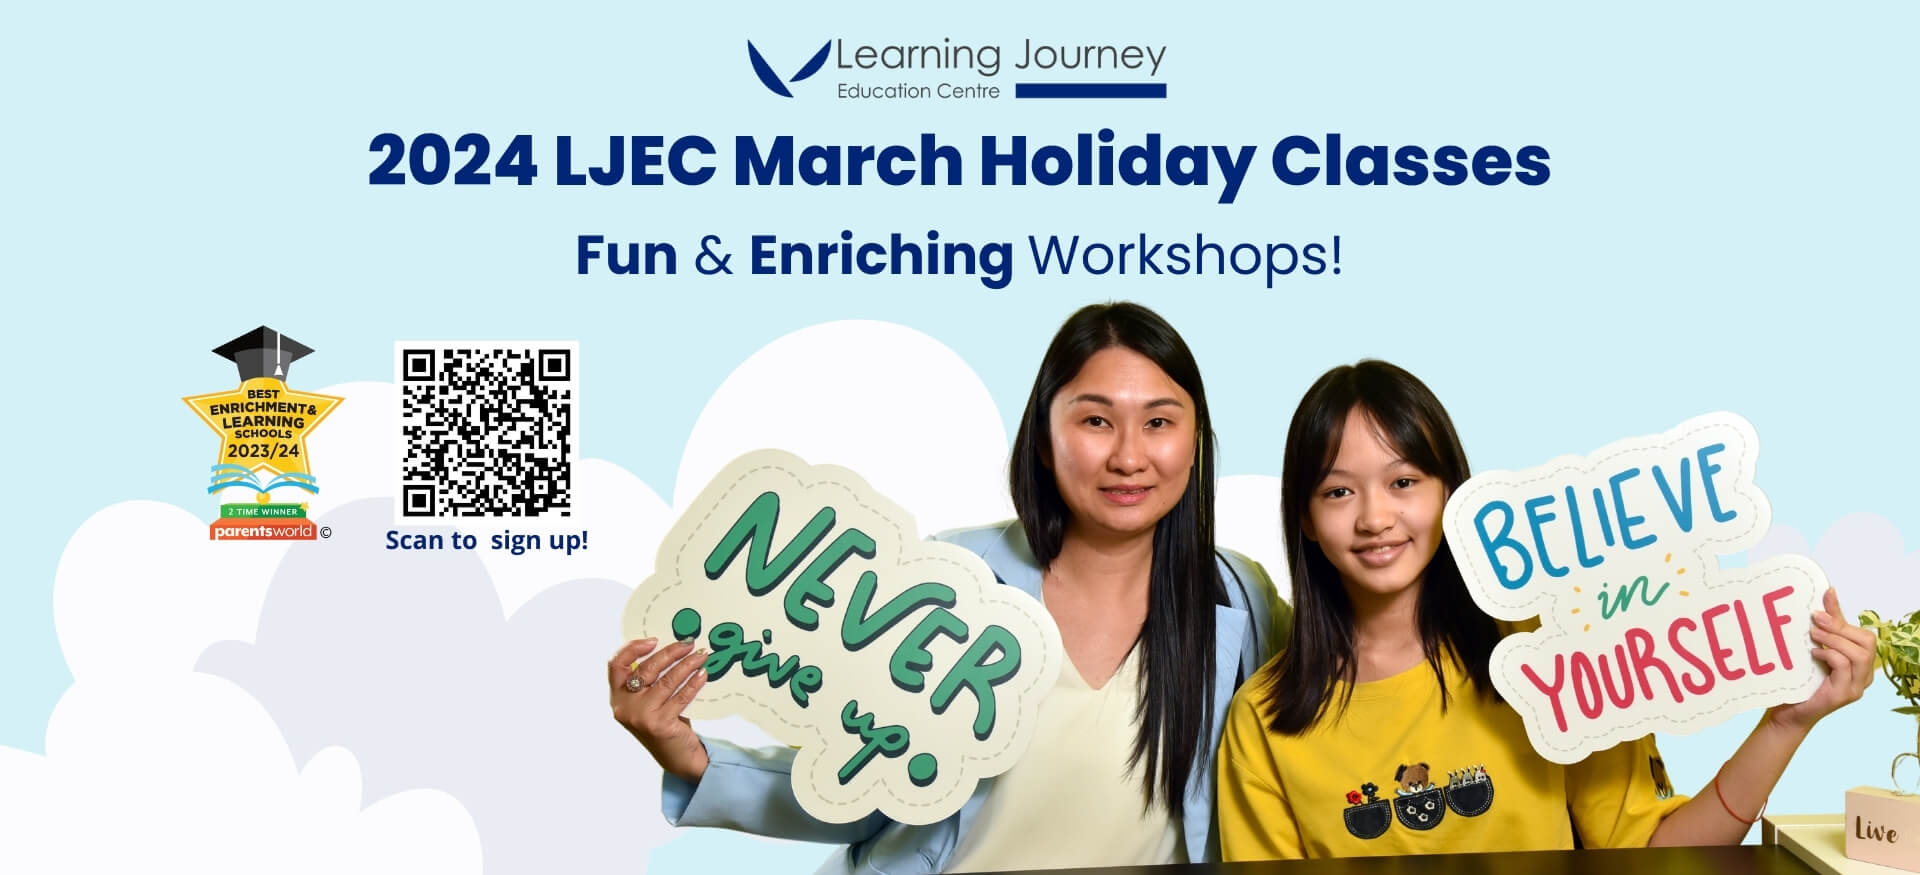 Learning Journey Education Centre.